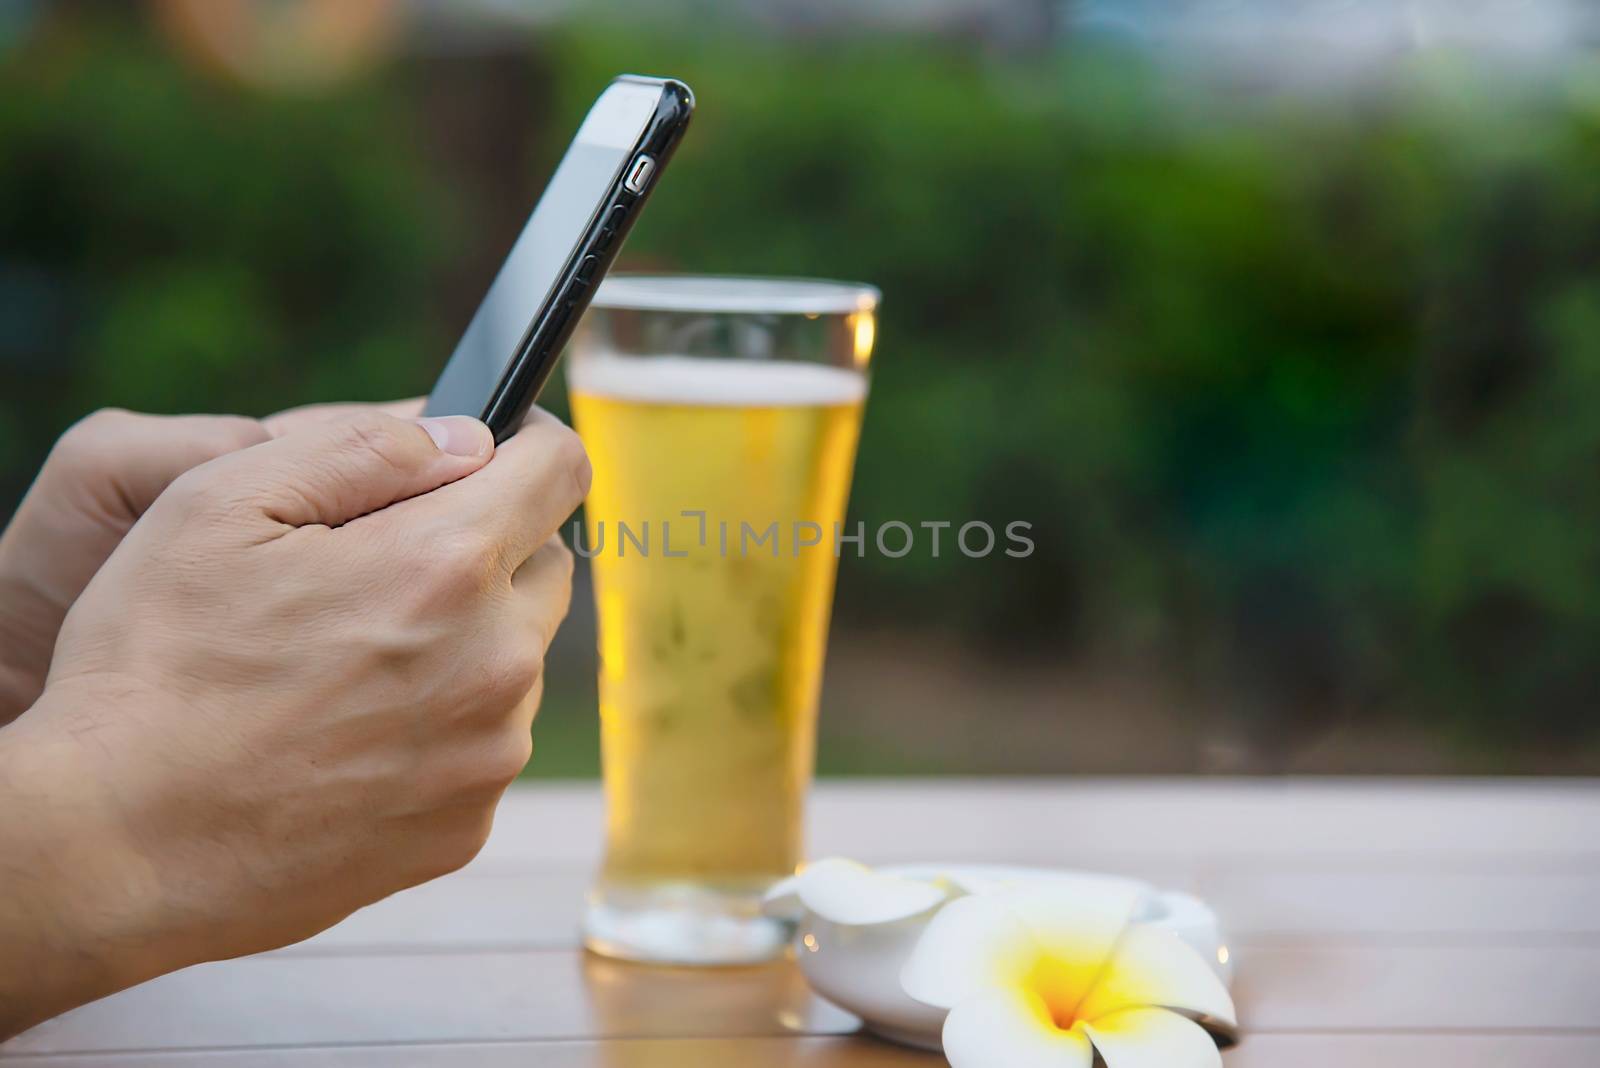 Man using mobile during happy time relax in restaurant with softdrink and green garden background - people relax with technology lifestyle concept